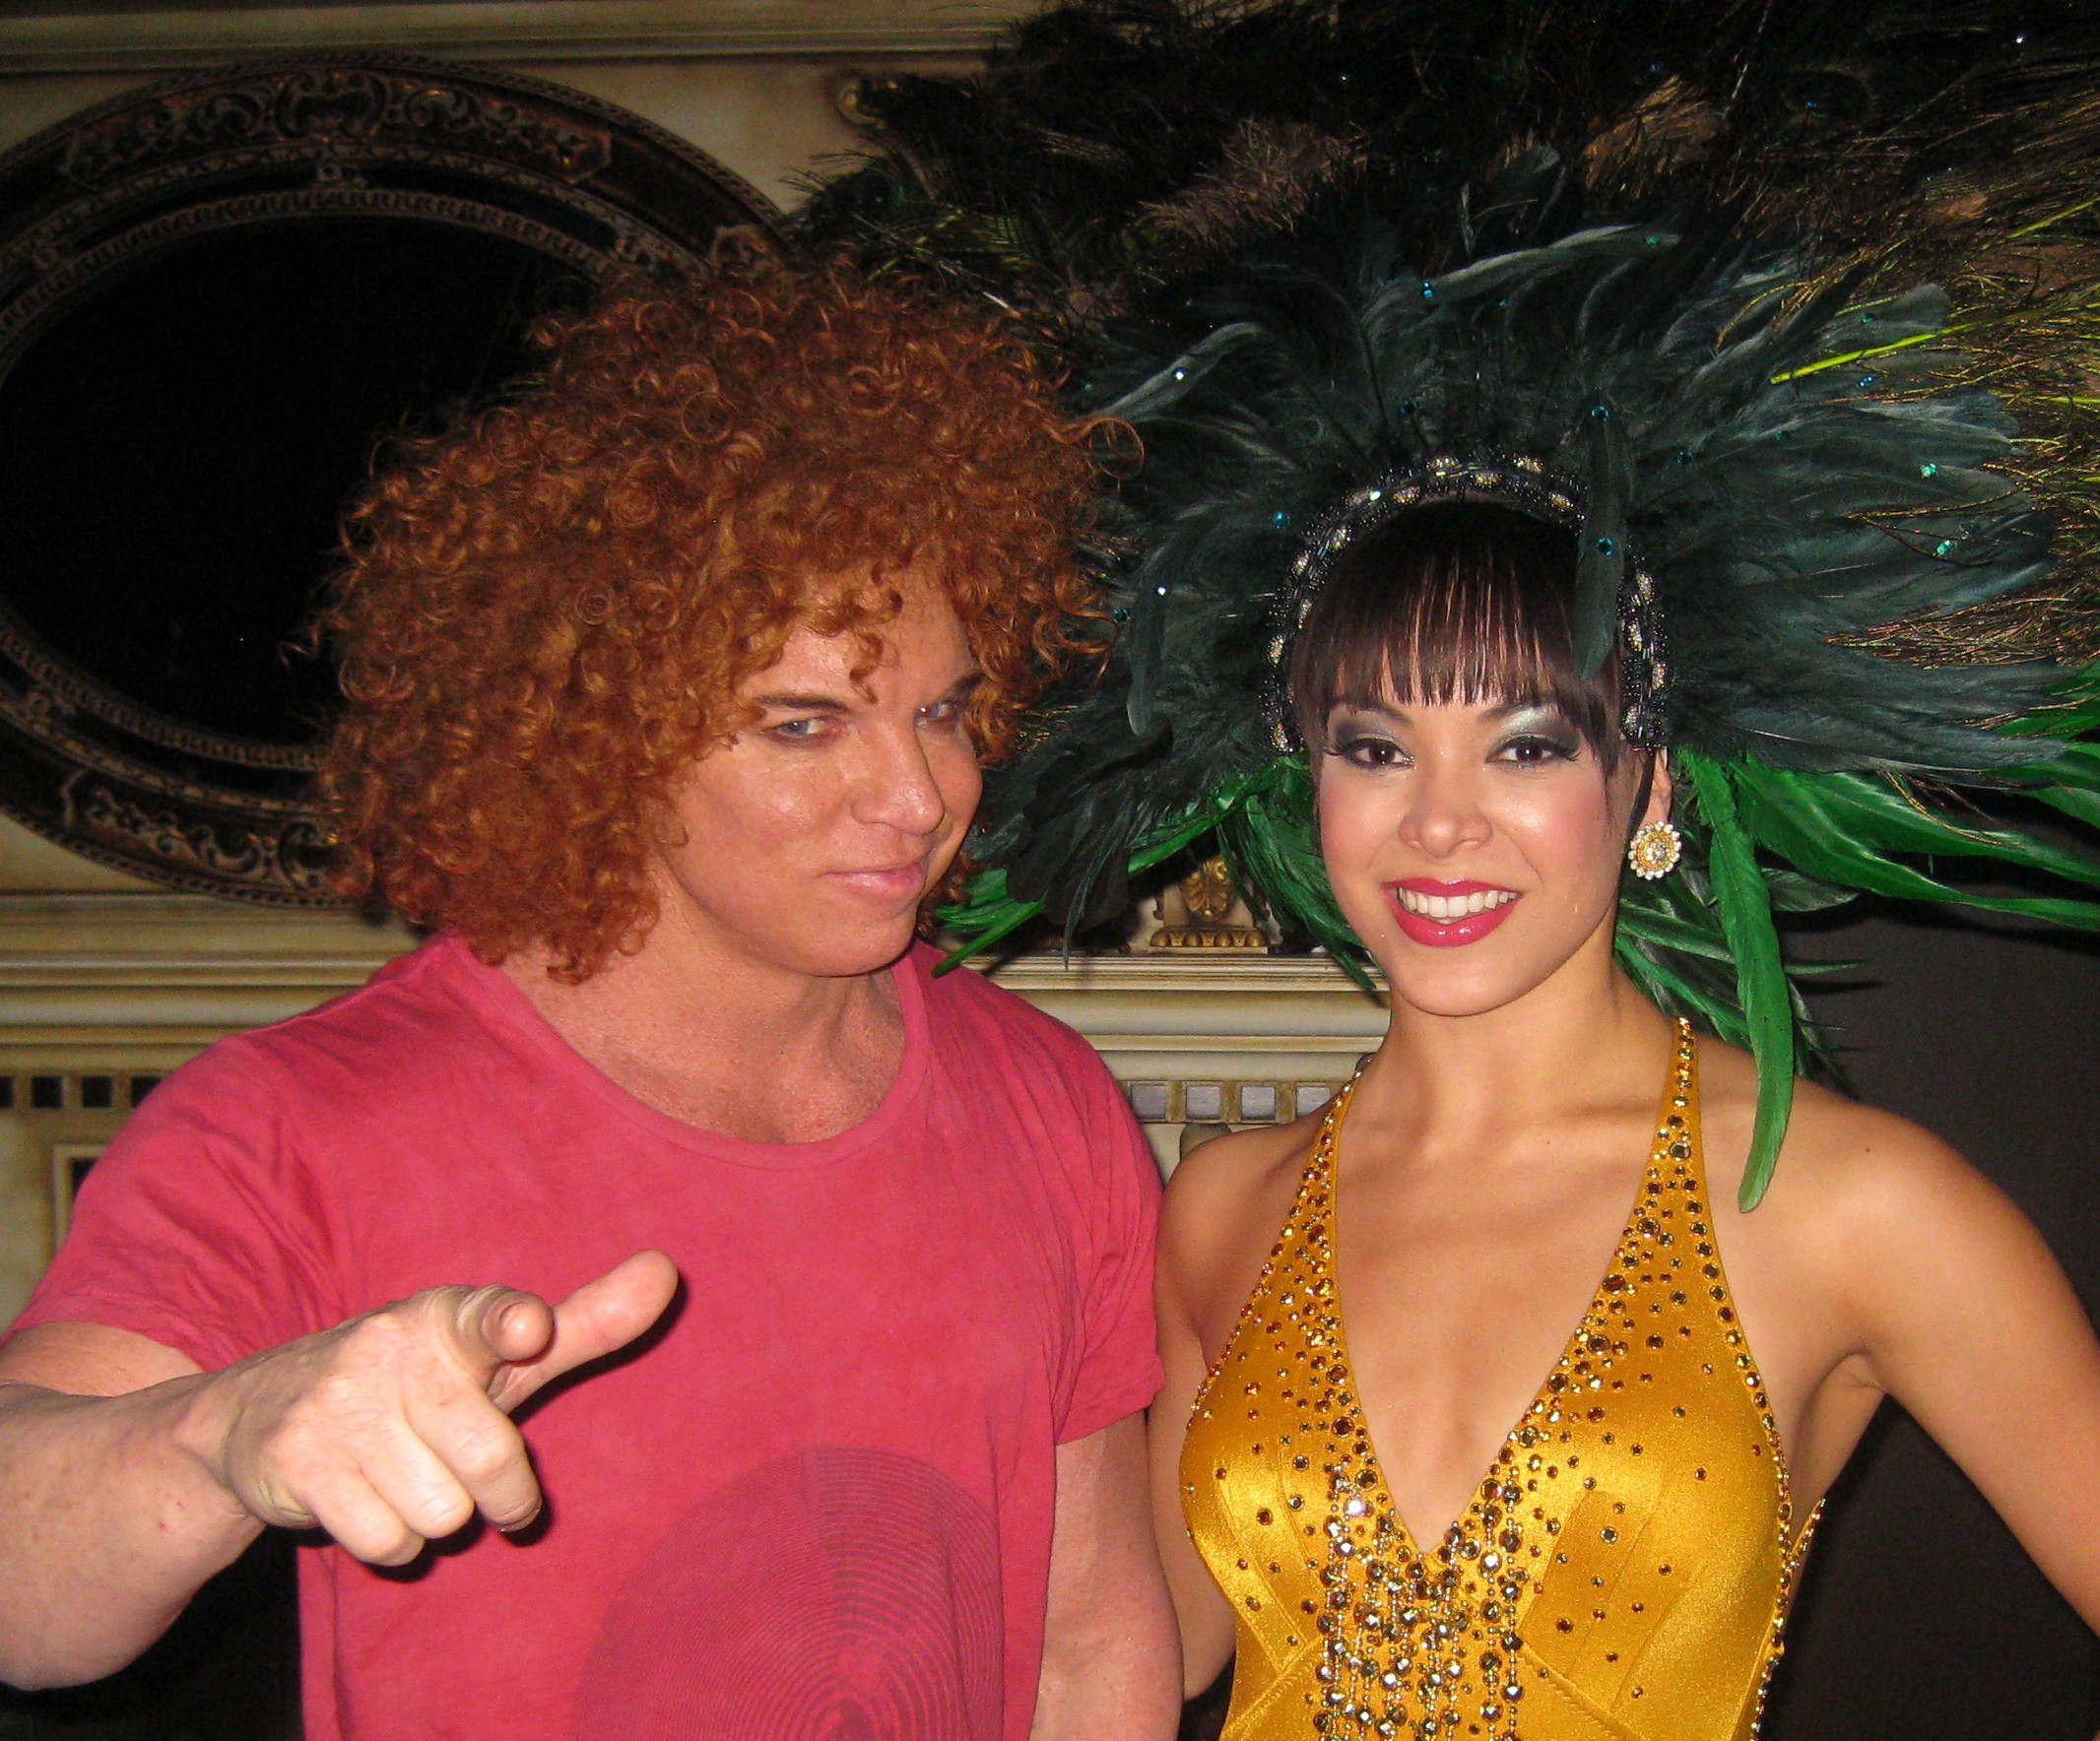 With Carrot Top while filming our scenes for 